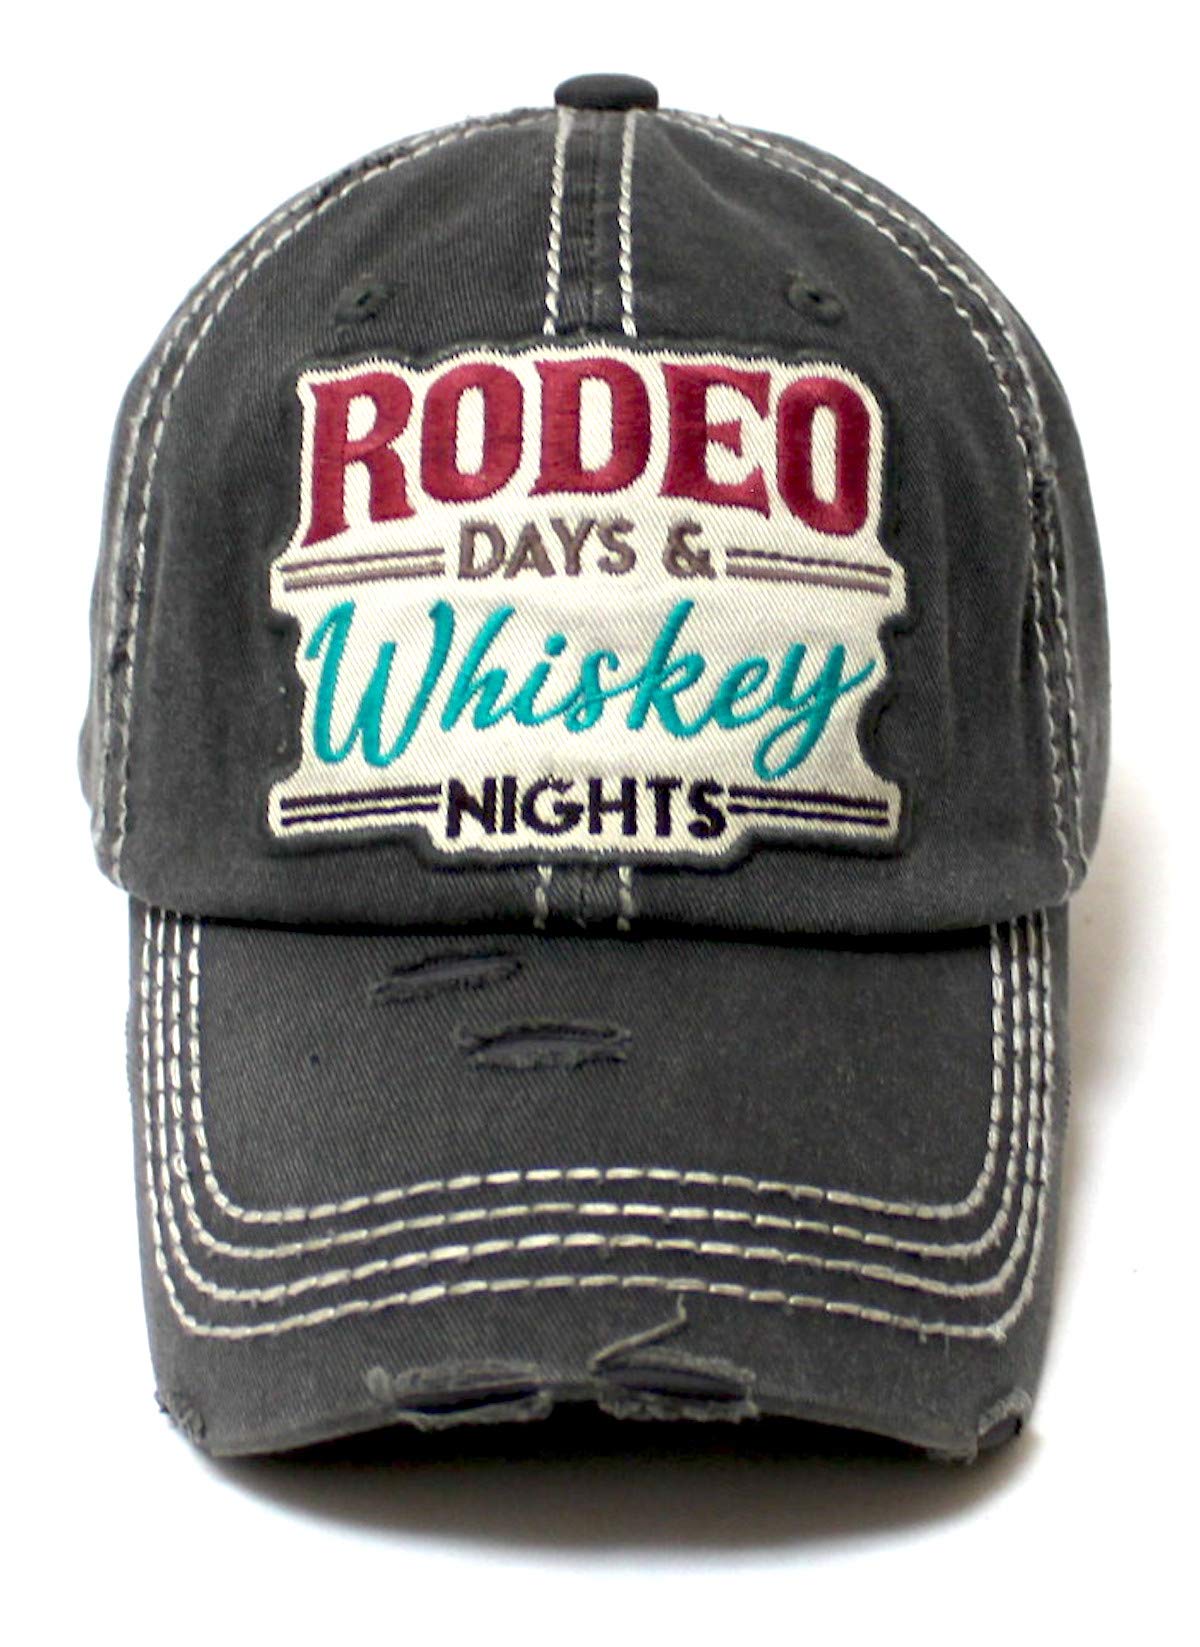 Rodeo Days Whiskey Nights Baseball Cap - Distressed Hats for Women - Summer Style Accessory in Vintage Black - Caps 'N Vintage 